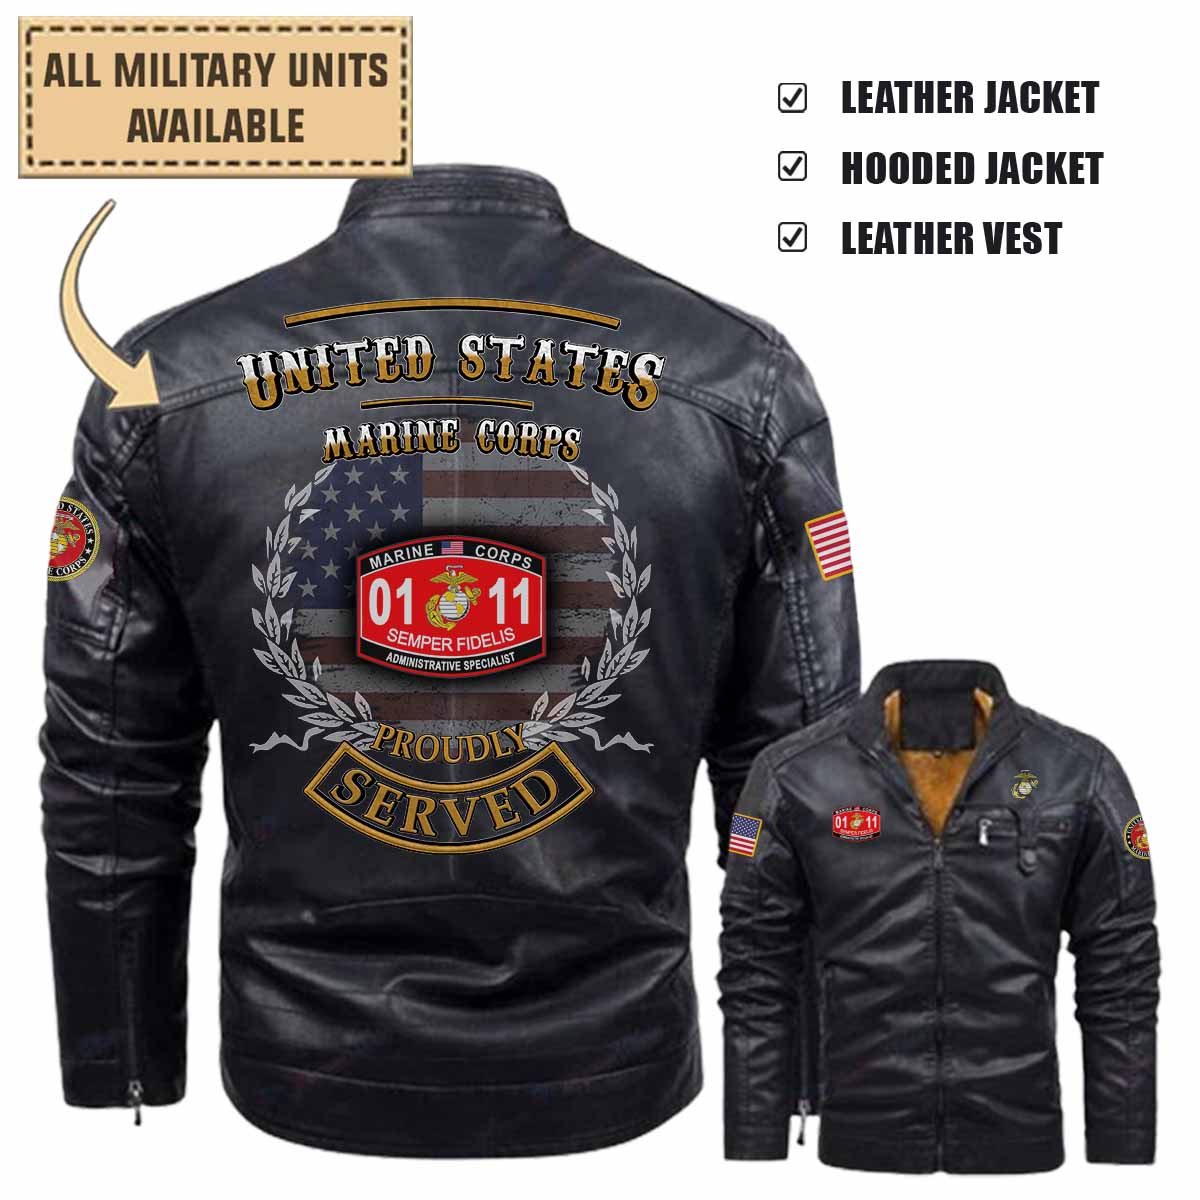 usmc mos 0111 administrative specialistleather jacket and vest